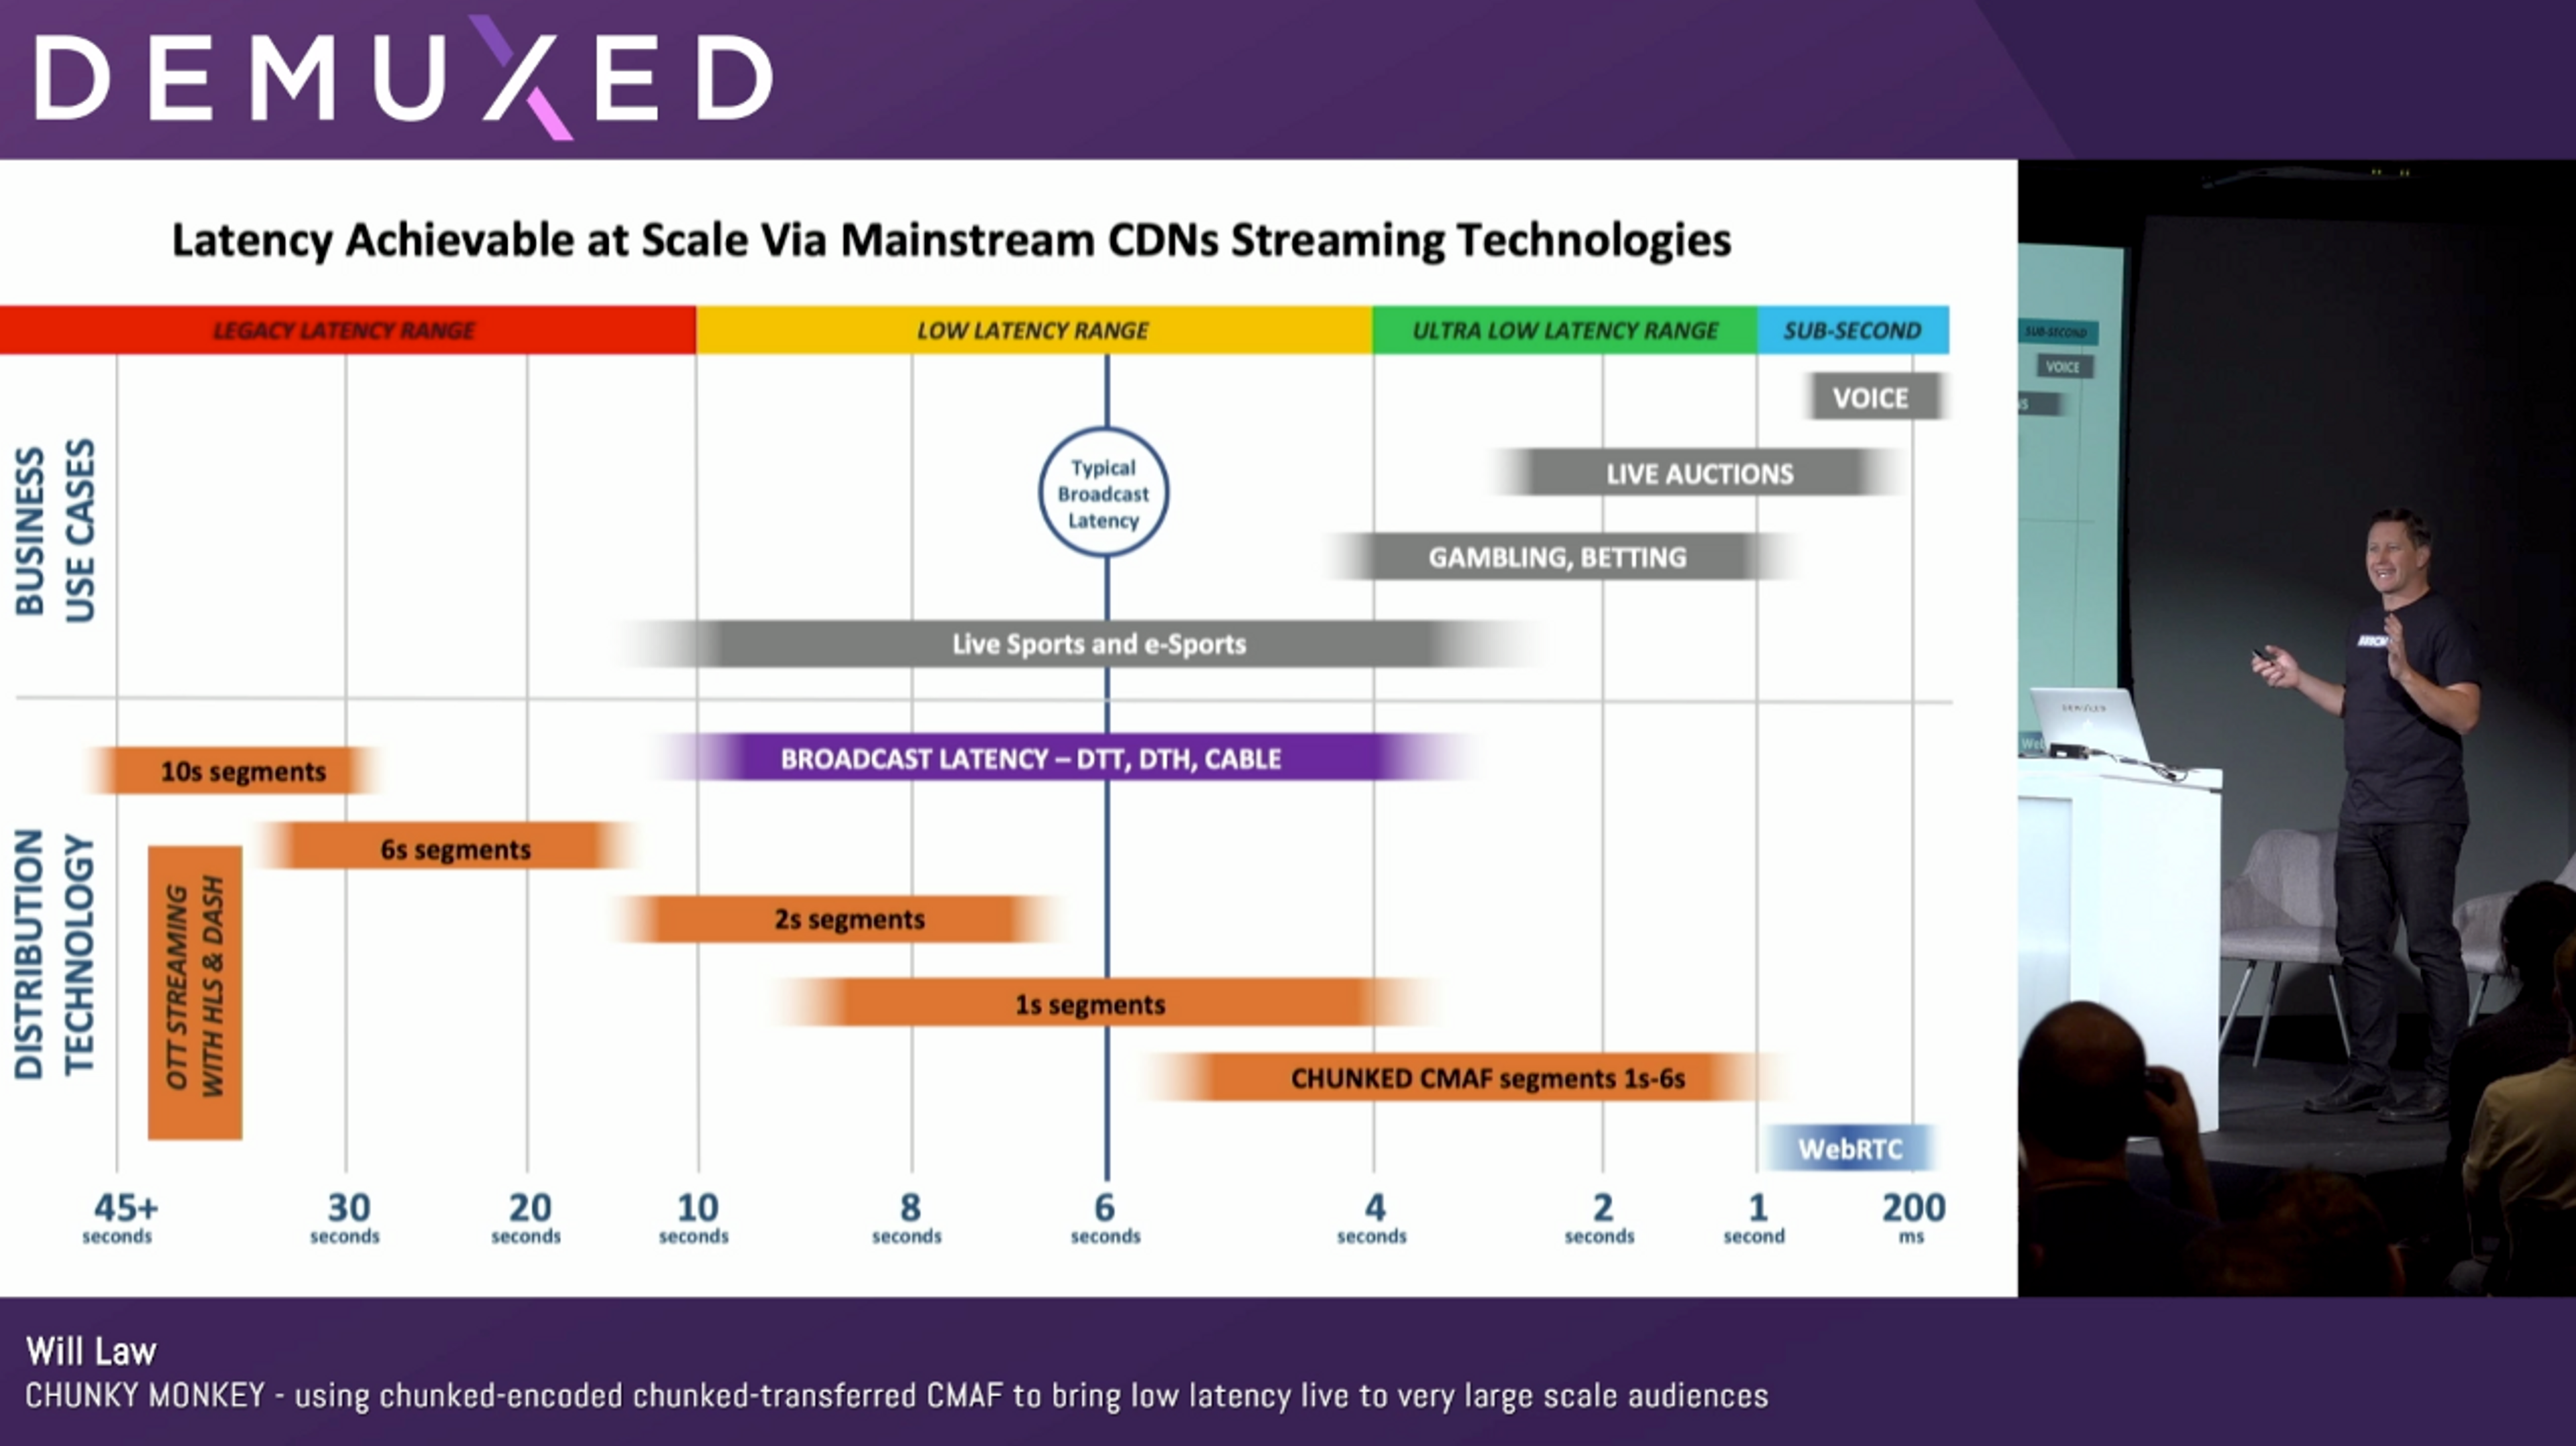 A diagram showing various ranges and definitions for low latency streaming